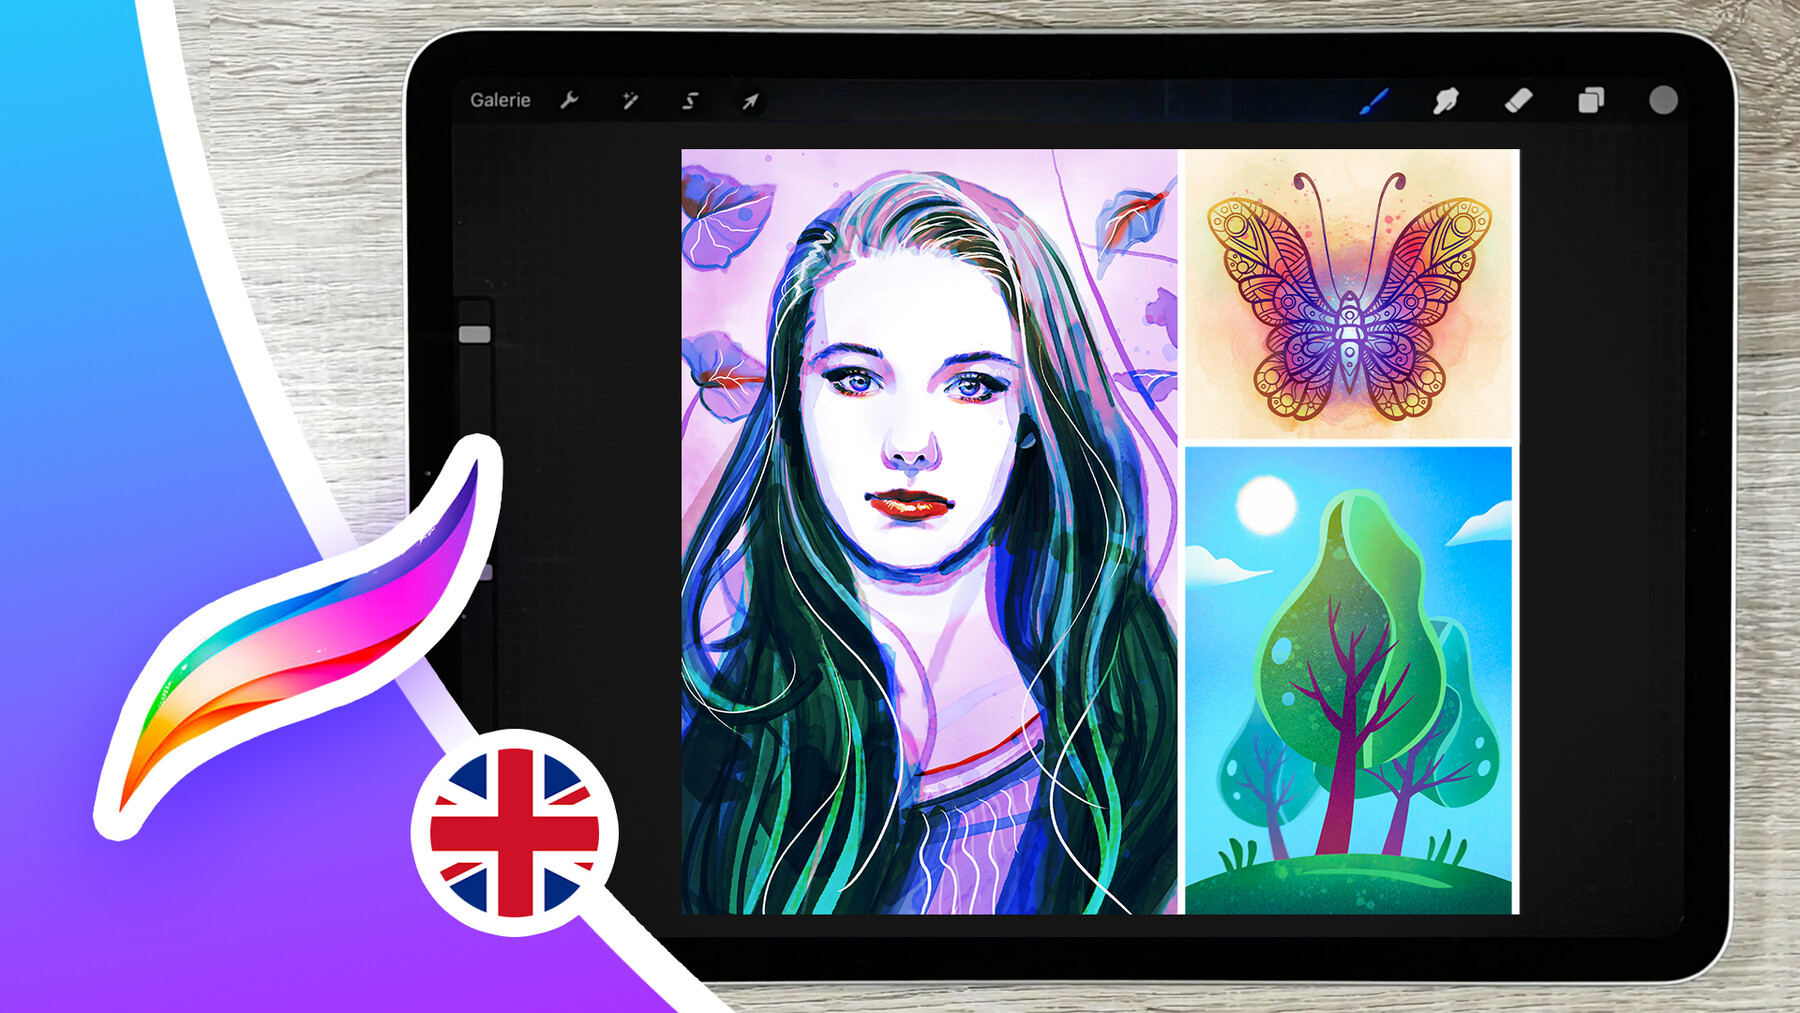 ArtStation Procreate OnlineCourse Learn Digital Drawing with the